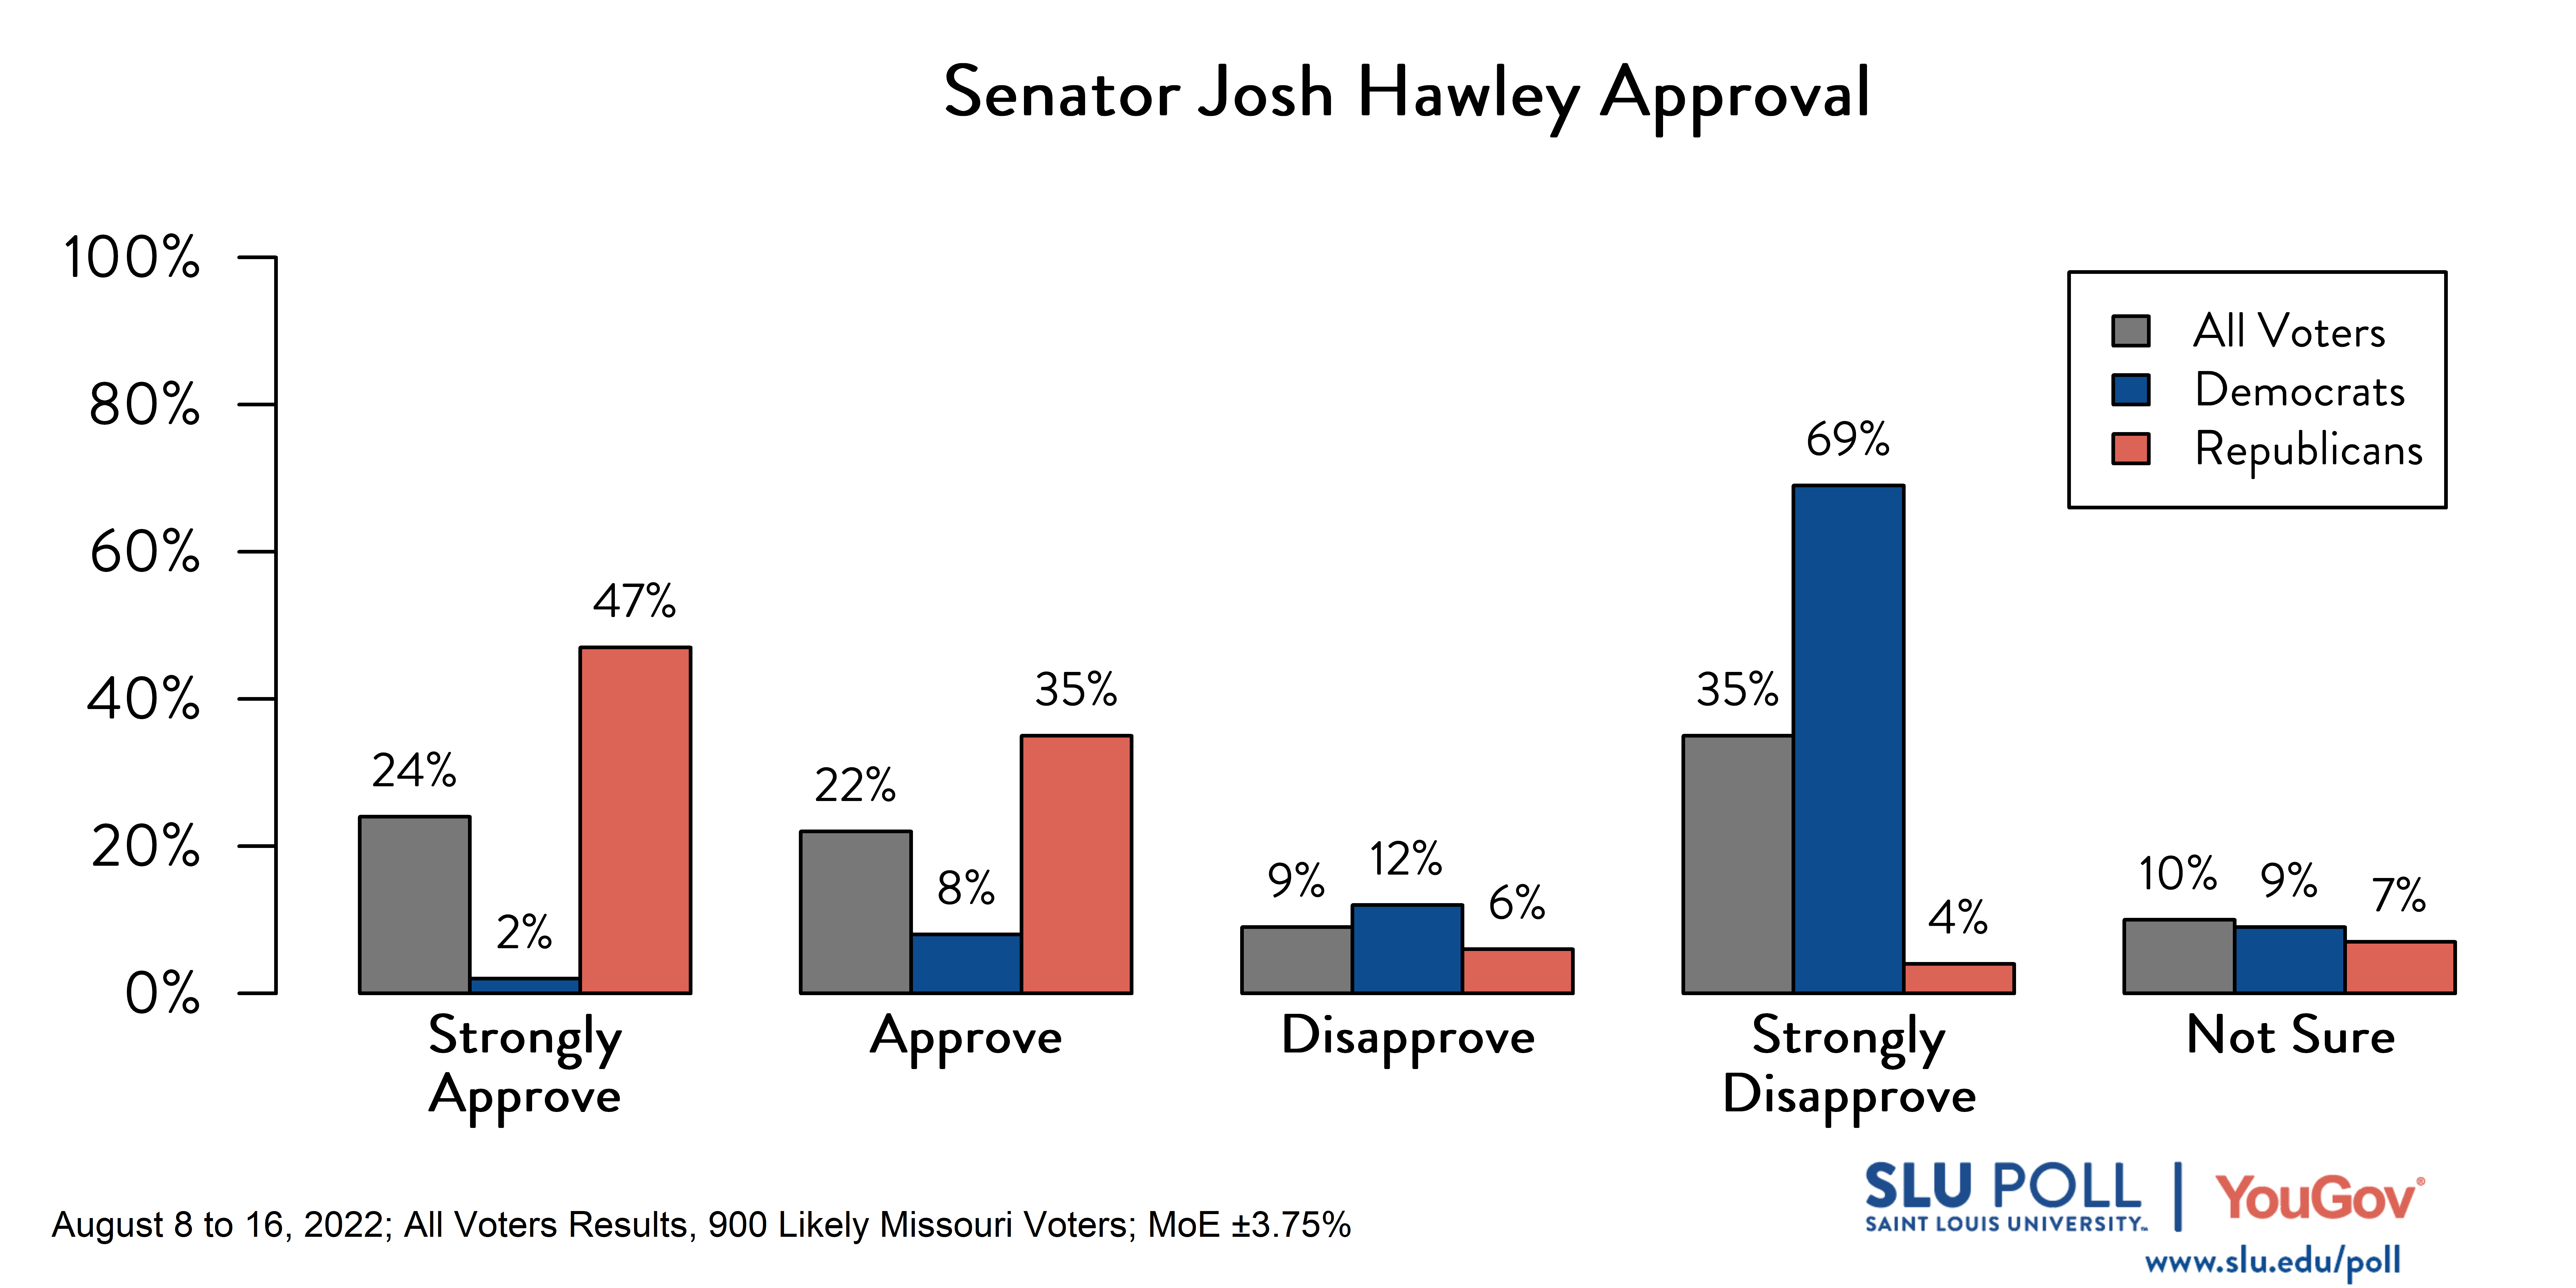 Likely voters' responses to 'Do you approve or disapprove of the way each is doing their job: Senator Josh Hawley?': 24% Strongly approve, 22% Approve, 9% Disapprove, 35% Strongly disapprove, and 10% Not sure. Democratic voters' responses: ' 2% Strongly approve, 8% Approve, 12% Disapprove, 69% Strongly disapprove, and 9% Not sure. Republican voters' responses: 47% Strongly approve, 35% Approve, 6% Disapprove, 4% Strongly disapprove, and 7% Not sure. 